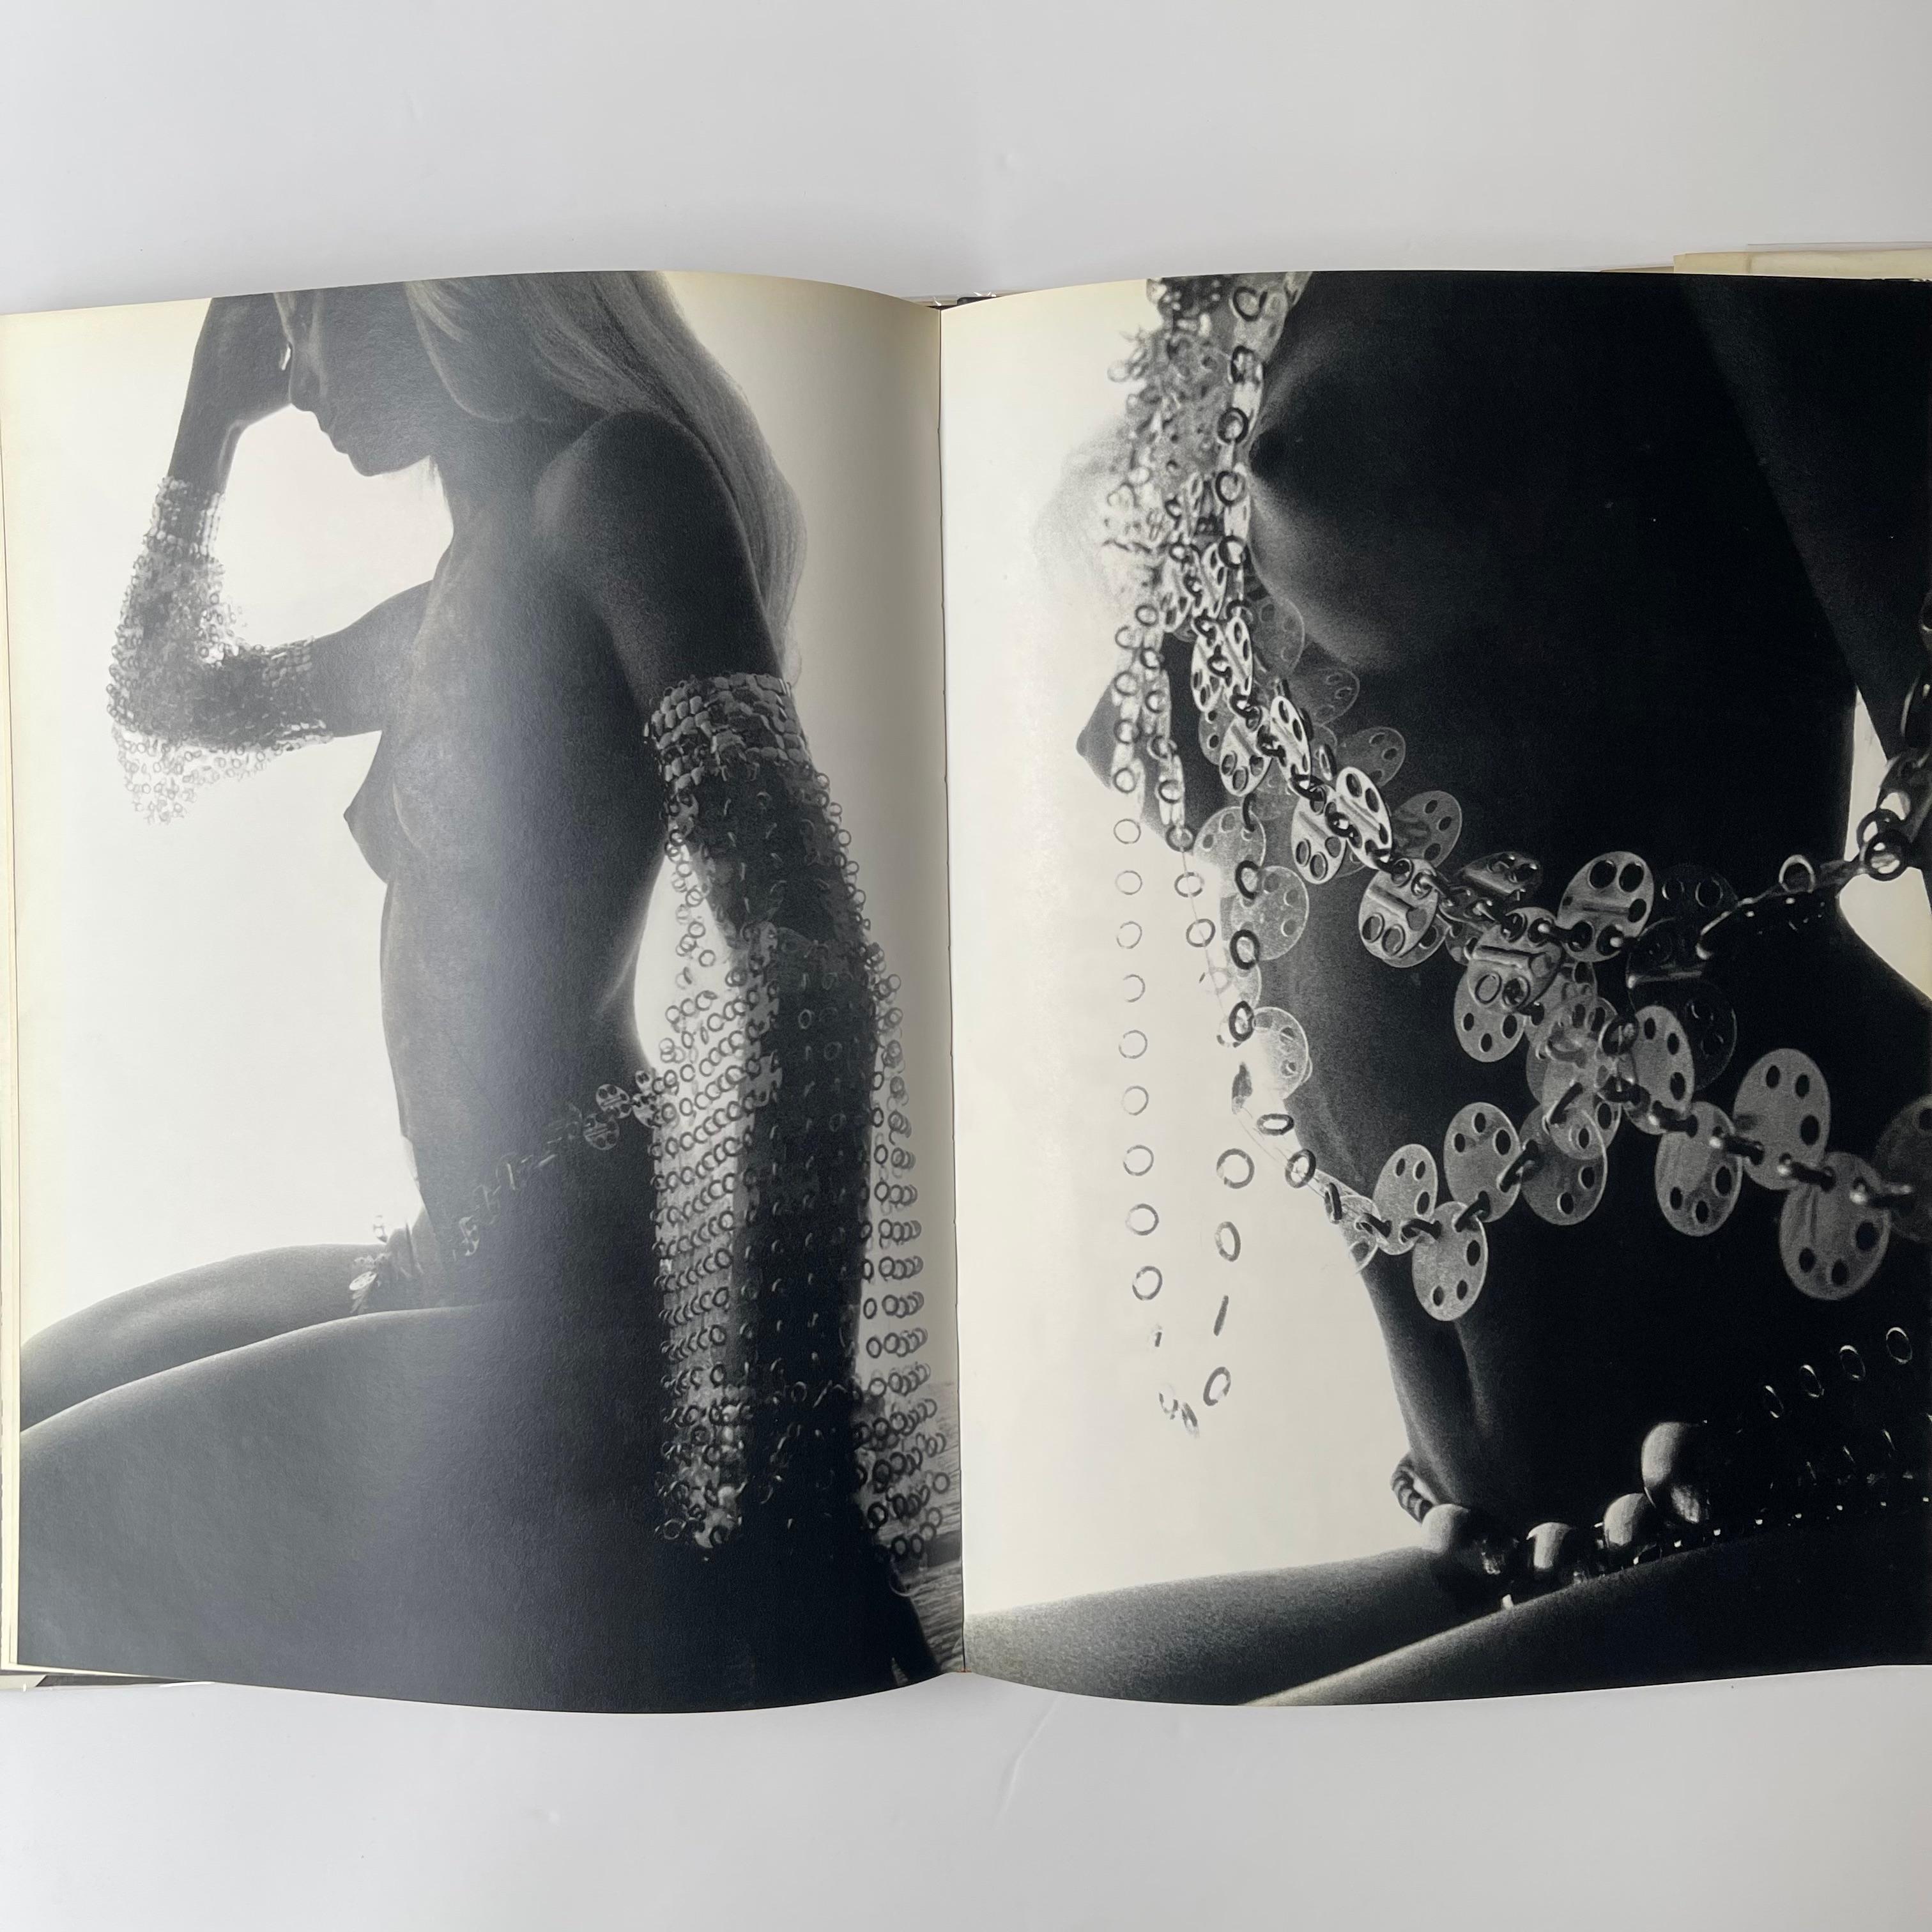 Canned Candies, The Exotic Women and Clothes of Paco Rabanne. Photographed  by Jean Clemmer.
Published by Charles Skilton Limited, 1969. 

A collaboration between the Parisian photographer of nudes, Jean Clemmer and flamboyant fashion designer, Paco